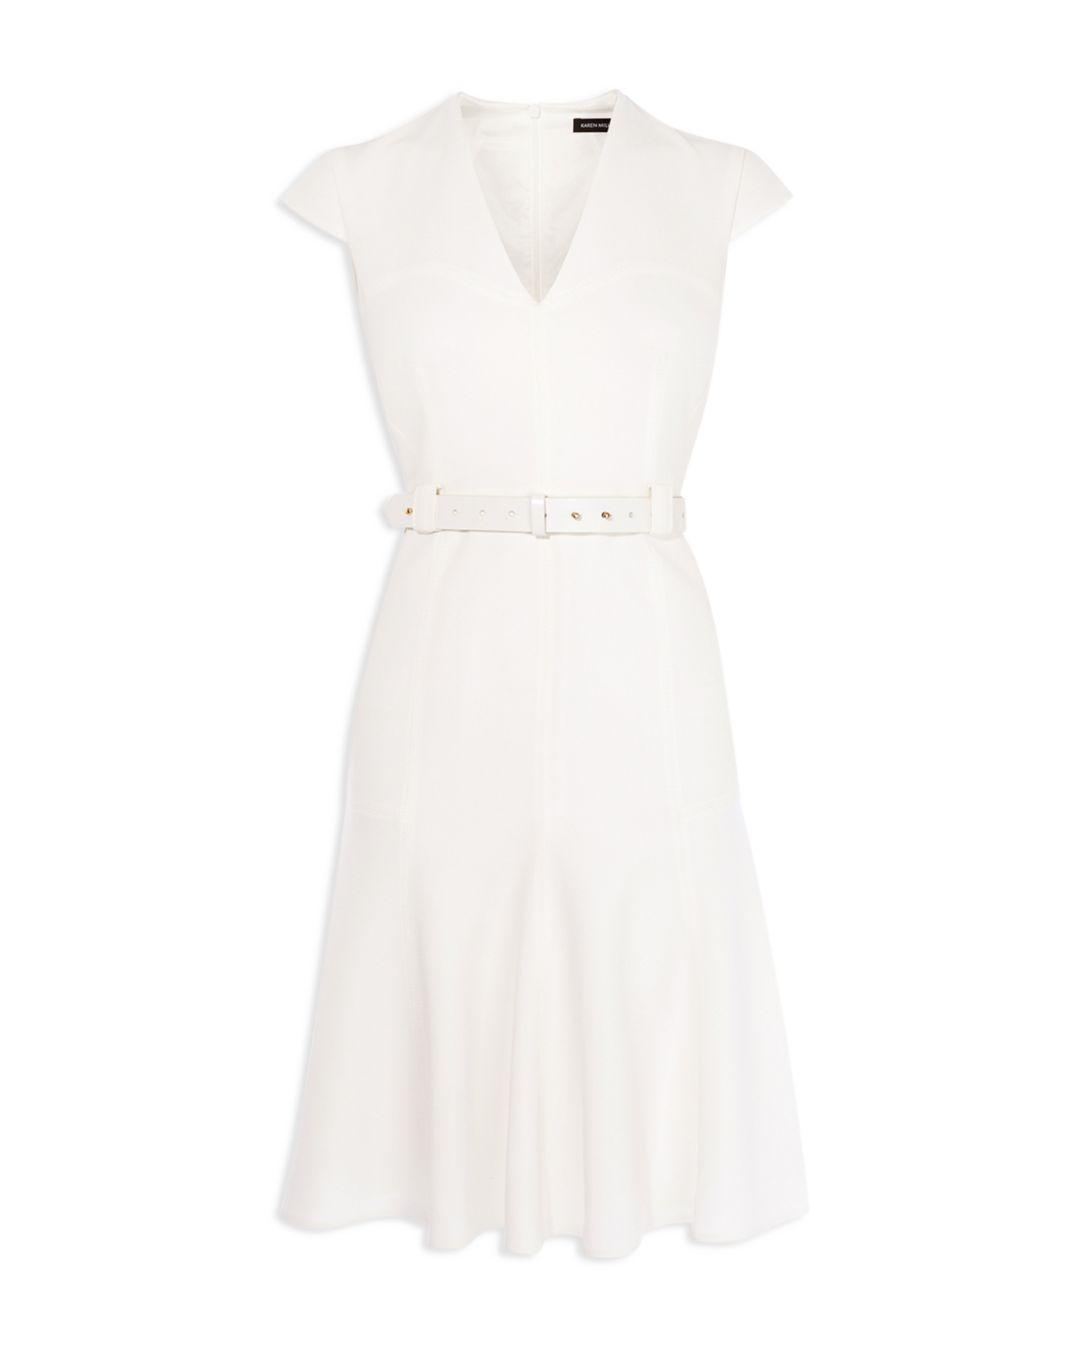 Karen Millen Belted Fit - And - Flare Dress in White | Lyst